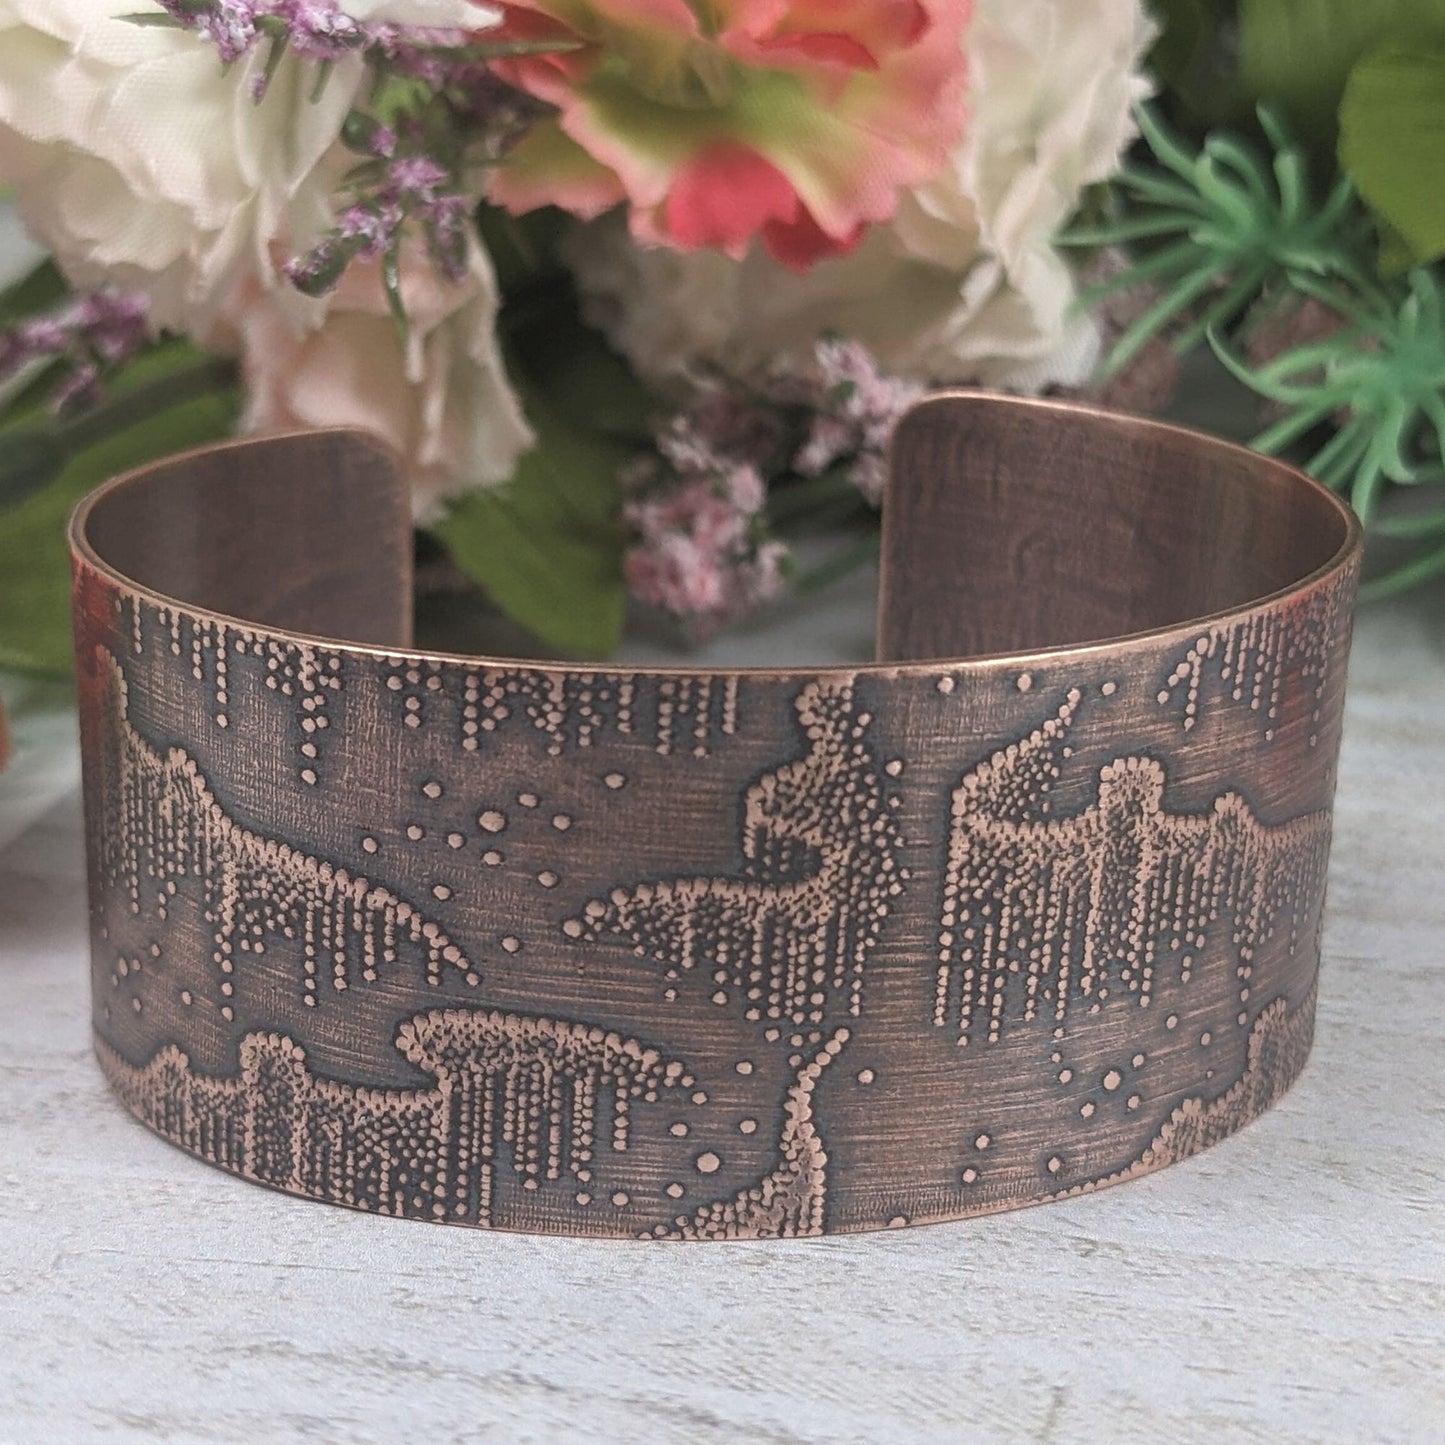 Wide copper cuff bracelet with repeated design pattern representing the aurora borealis Staged with flowers in the background